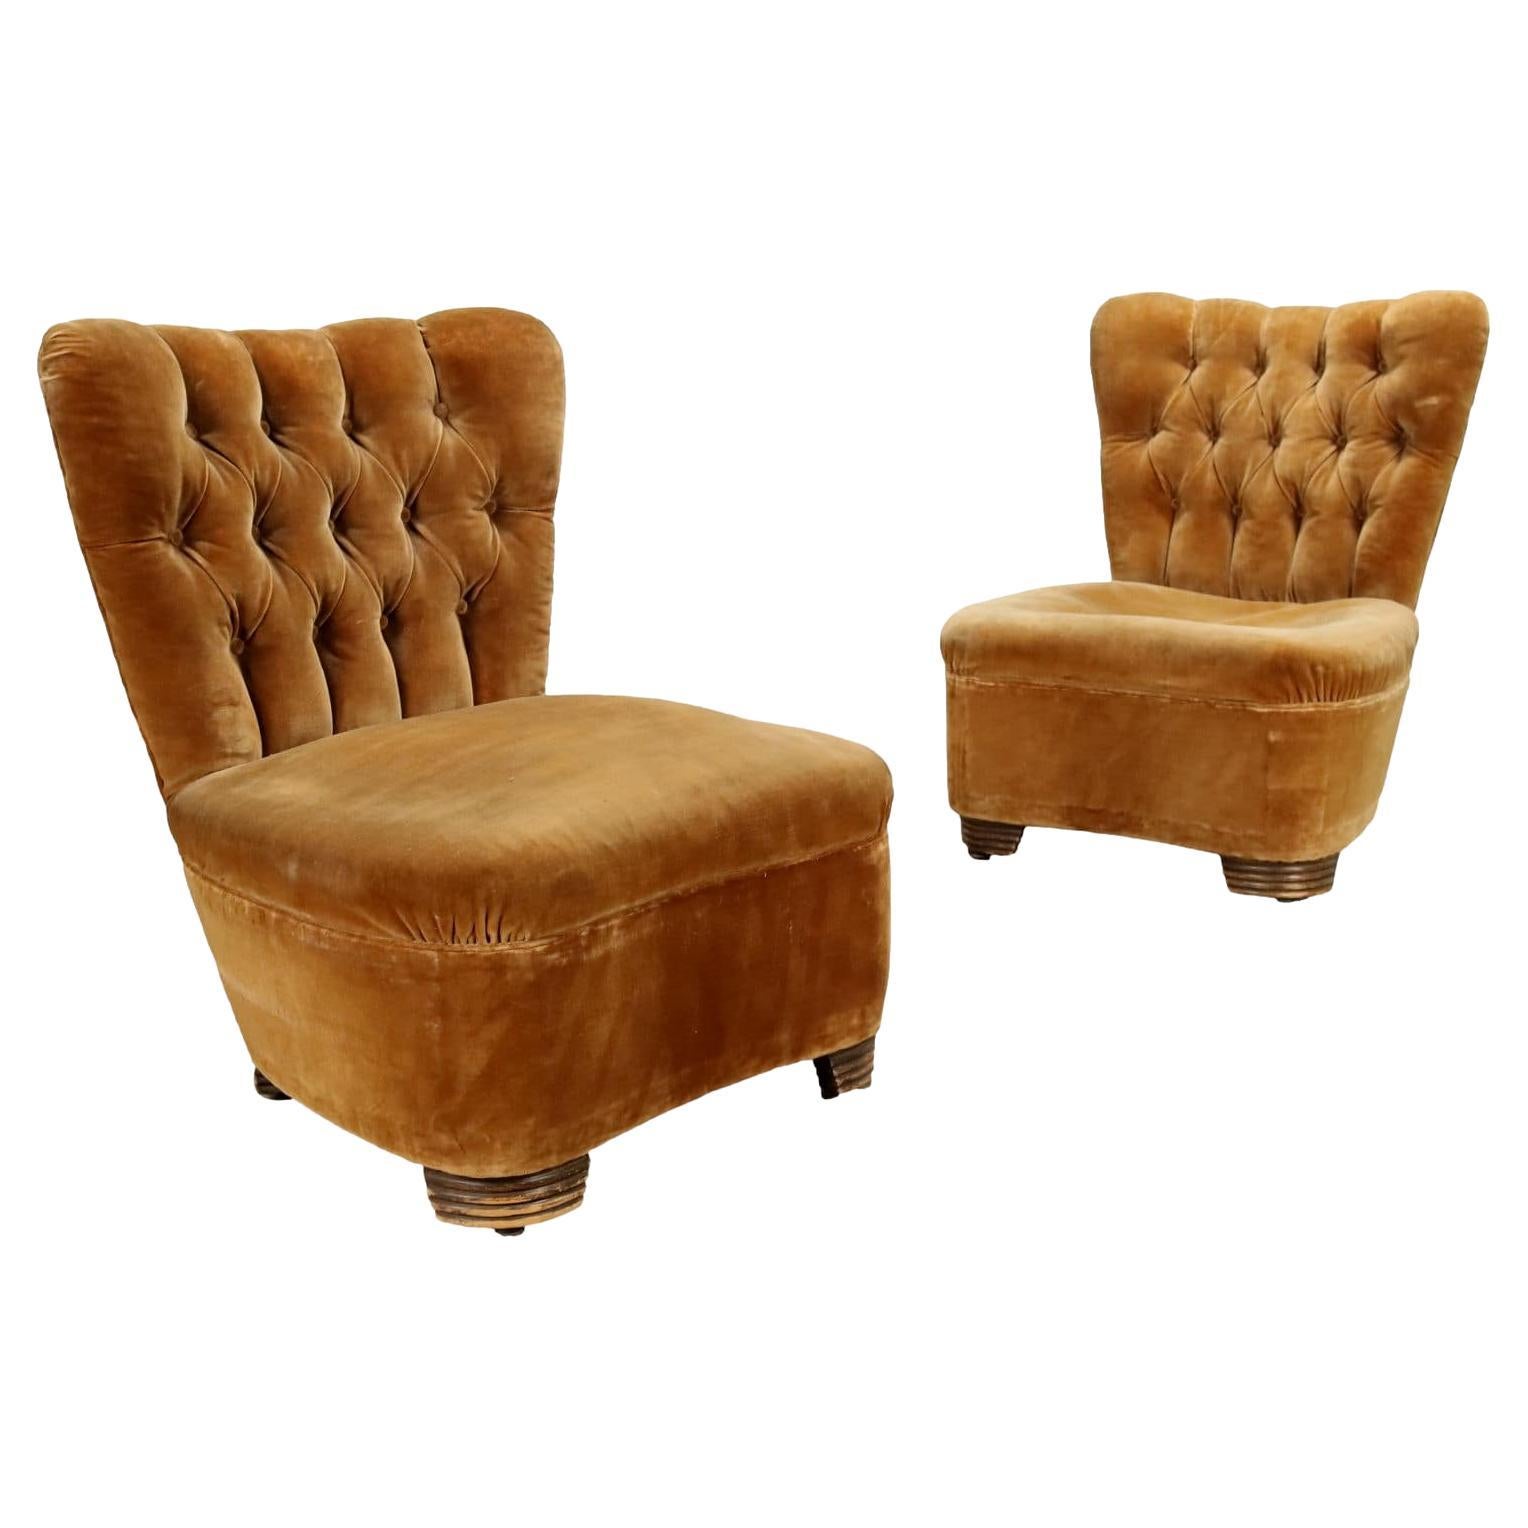 Pair of 1940s Armchairs For Sale